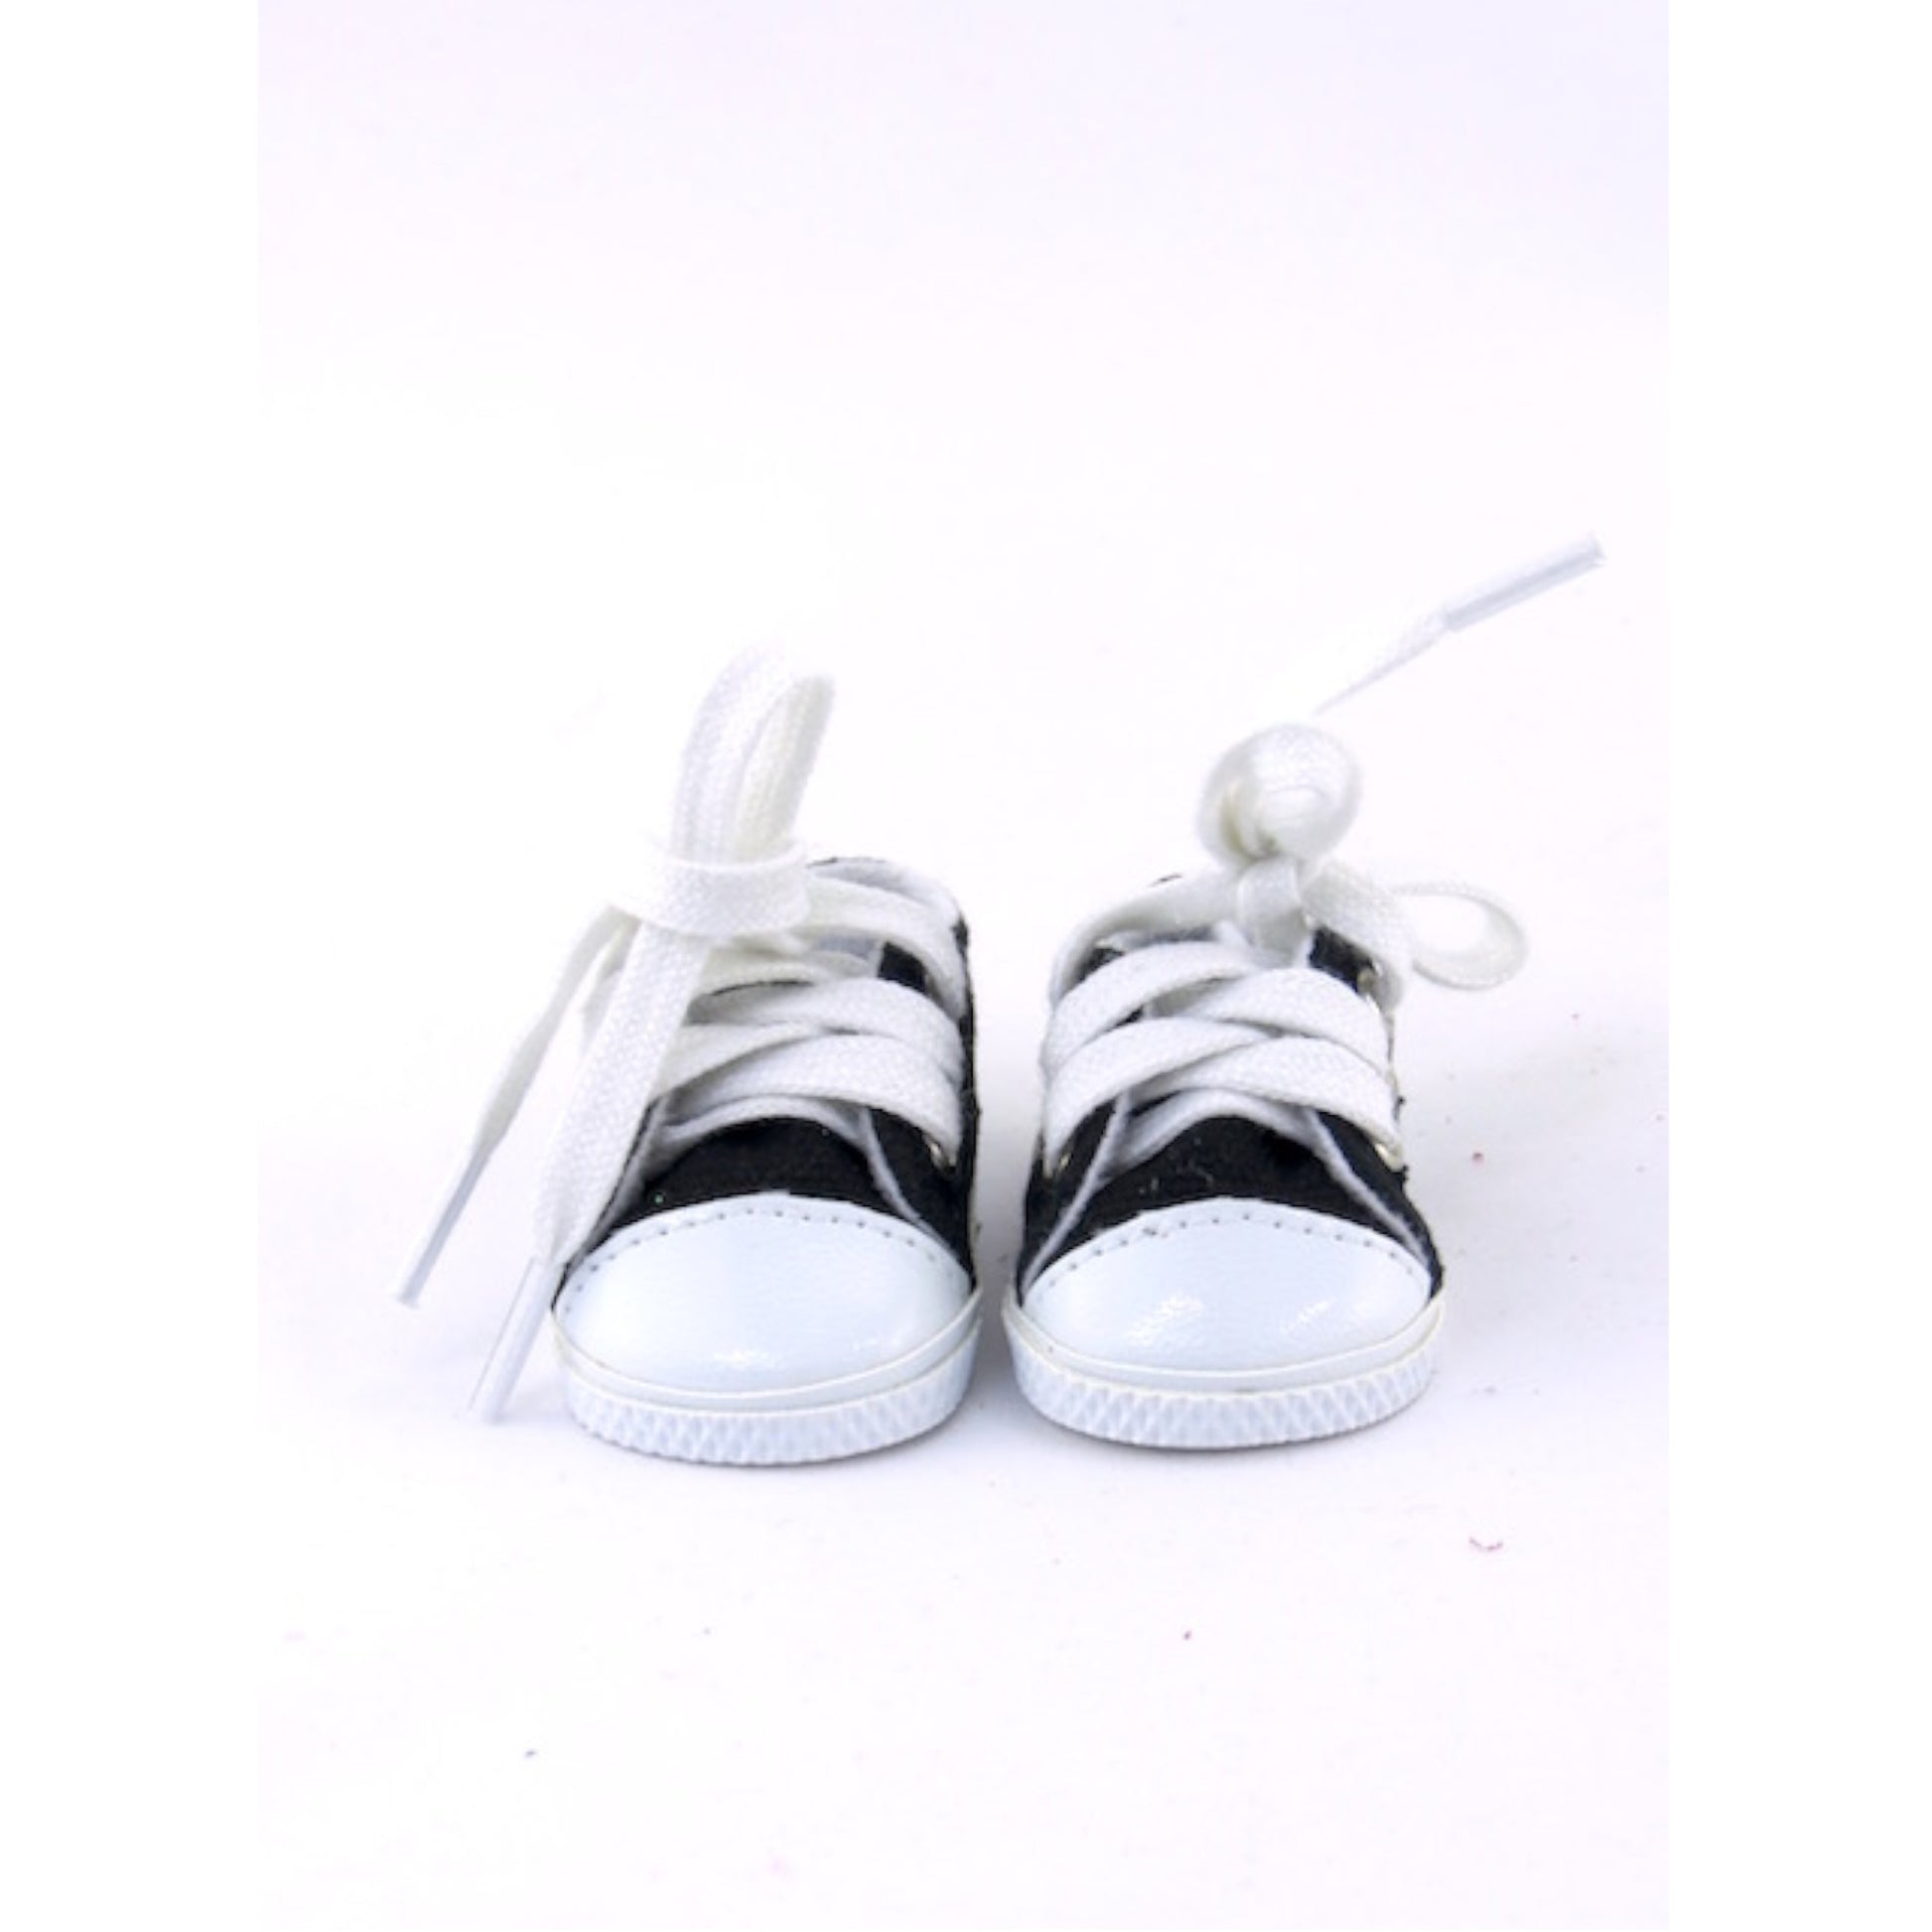 Black Low Cut Sneakers for 14.5 inch Dolls